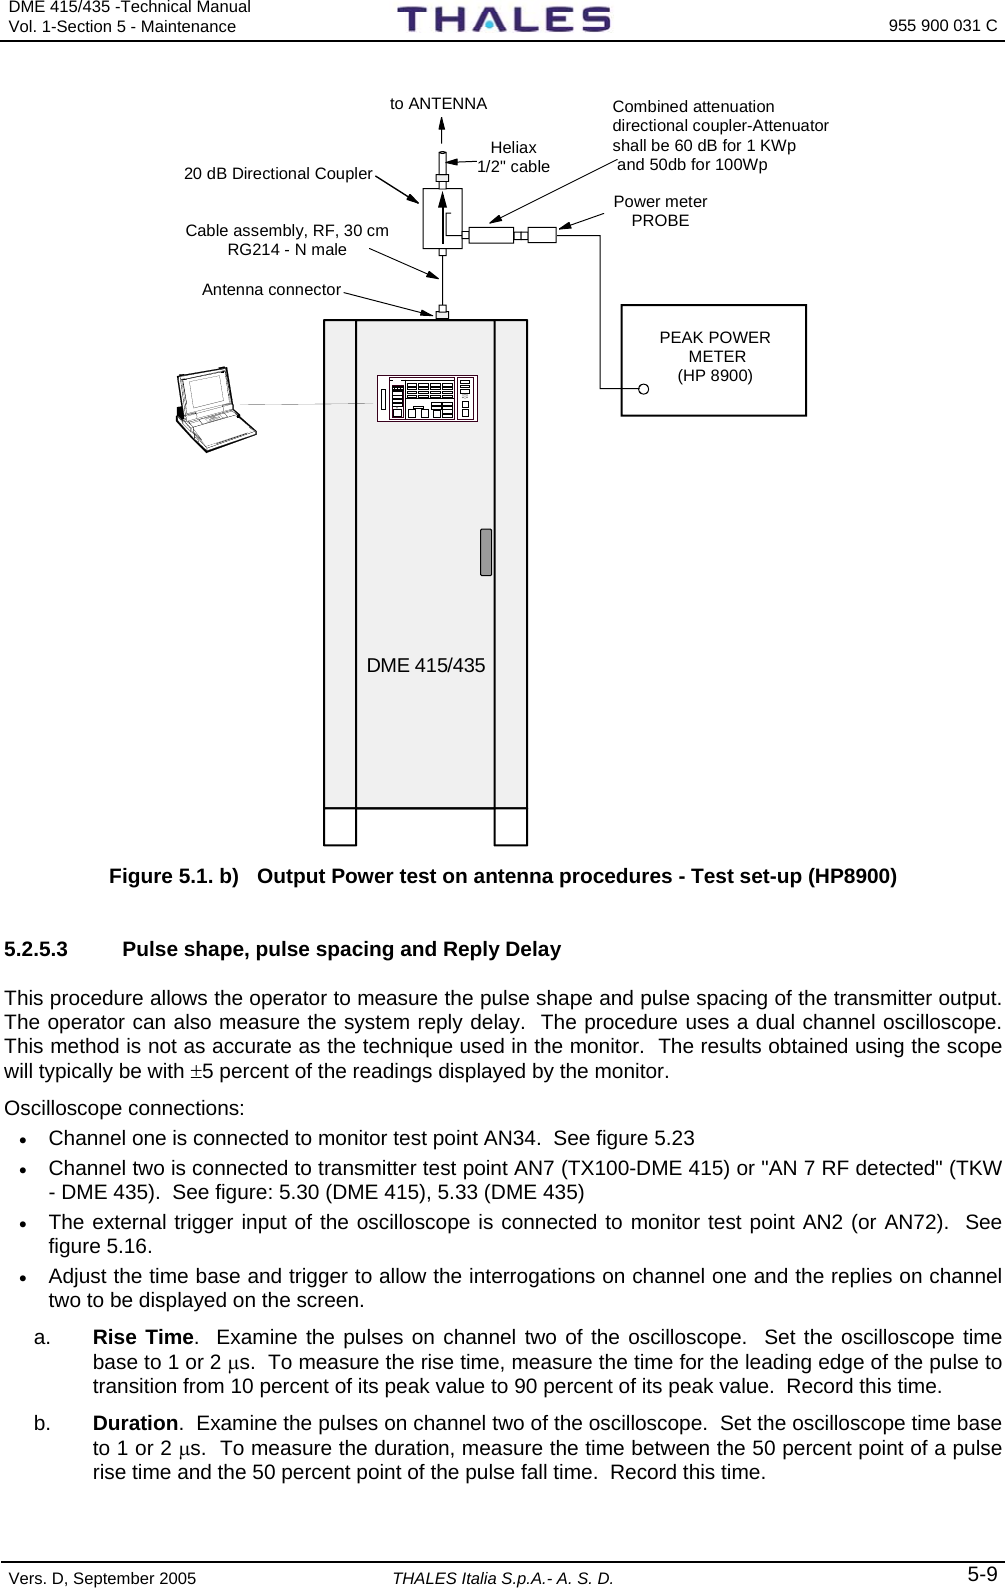 DME 415/435 -Technical Manual Vol. 1-Section 5 - Maintenance    955 900 031 C Vers. D, September 2005  THALES Italia S.p.A.- A. S. D. 5-9 DME 415/435 Cable assembly, RF, 30 cmRG214 - N male20 dB Directional CouplerPEAK POWER METER(HP 8900)to ANTENNAHeliax1/2&quot; cableCombined attenuationdirectional coupler-Attenuatorshall be 60 dB for 1 KWp and 50db for 100WpPower meterPROBEAntenna connector Figure 5.1. b)  Output Power test on antenna procedures - Test set-up (HP8900)   5.2.5.3  Pulse shape, pulse spacing and Reply Delay This procedure allows the operator to measure the pulse shape and pulse spacing of the transmitter output.  The operator can also measure the system reply delay.  The procedure uses a dual channel oscilloscope.  This method is not as accurate as the technique used in the monitor.  The results obtained using the scope will typically be with ±5 percent of the readings displayed by the monitor. Oscilloscope connections: • Channel one is connected to monitor test point AN34.  See figure 5.23 • Channel two is connected to transmitter test point AN7 (TX100-DME 415) or &quot;AN 7 RF detected&quot; (TKW - DME 435).  See figure: 5.30 (DME 415), 5.33 (DME 435) • The external trigger input of the oscilloscope is connected to monitor test point AN2 (or AN72).  See figure 5.16. • Adjust the time base and trigger to allow the interrogations on channel one and the replies on channel two to be displayed on the screen. a.  Rise Time.  Examine the pulses on channel two of the oscilloscope.  Set the oscilloscope time base to 1 or 2 μs.  To measure the rise time, measure the time for the leading edge of the pulse to transition from 10 percent of its peak value to 90 percent of its peak value.  Record this time. b.  Duration.  Examine the pulses on channel two of the oscilloscope.  Set the oscilloscope time base to 1 or 2 μs.  To measure the duration, measure the time between the 50 percent point of a pulse rise time and the 50 percent point of the pulse fall time.  Record this time. 